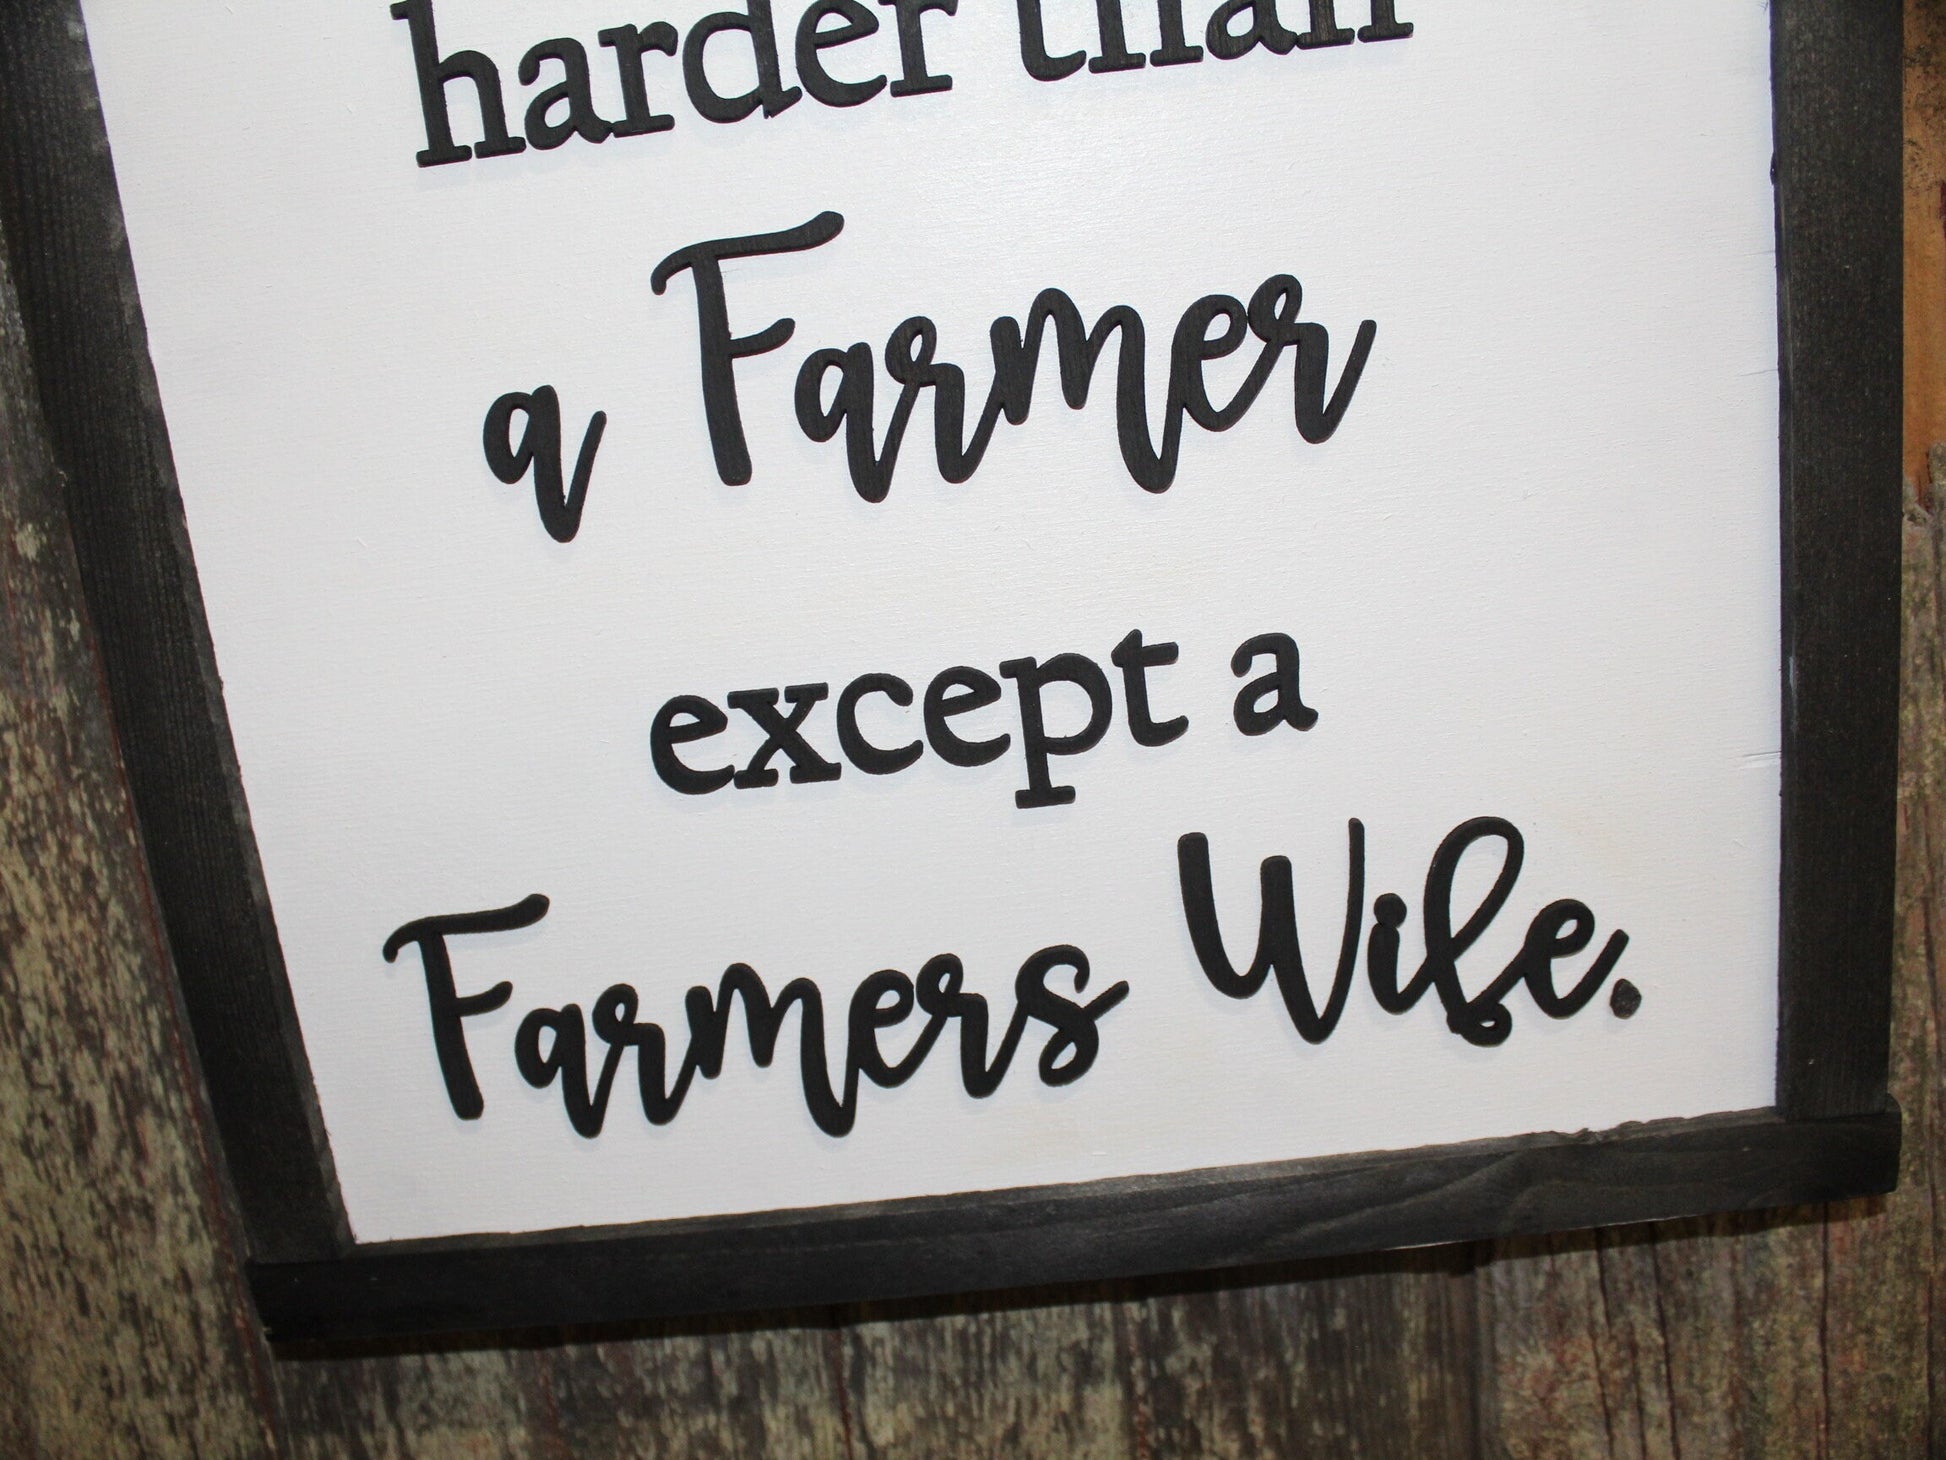 No One Works Harder Than A Farmers Wife Decor Sign Appreciation Gift Farming Wife 3D Handmade Wood Sign Raised Text Farmers Kitchen Living